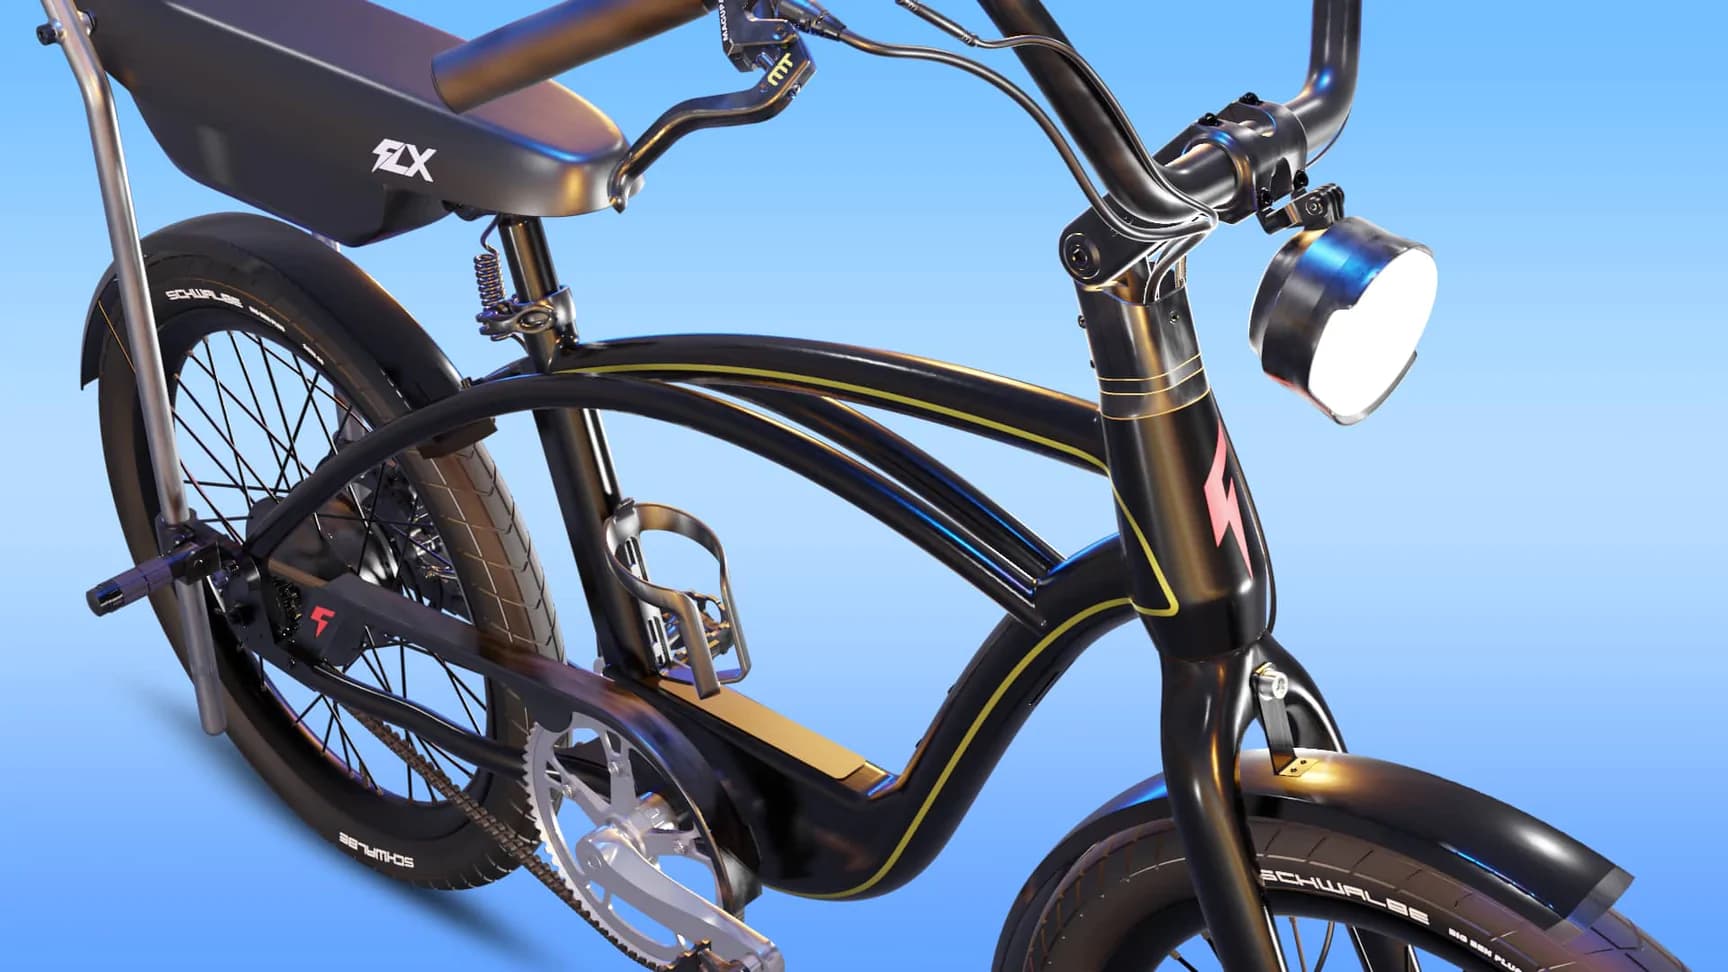 FLX Menace unveiled as retro e-bike with an extra dose of cool